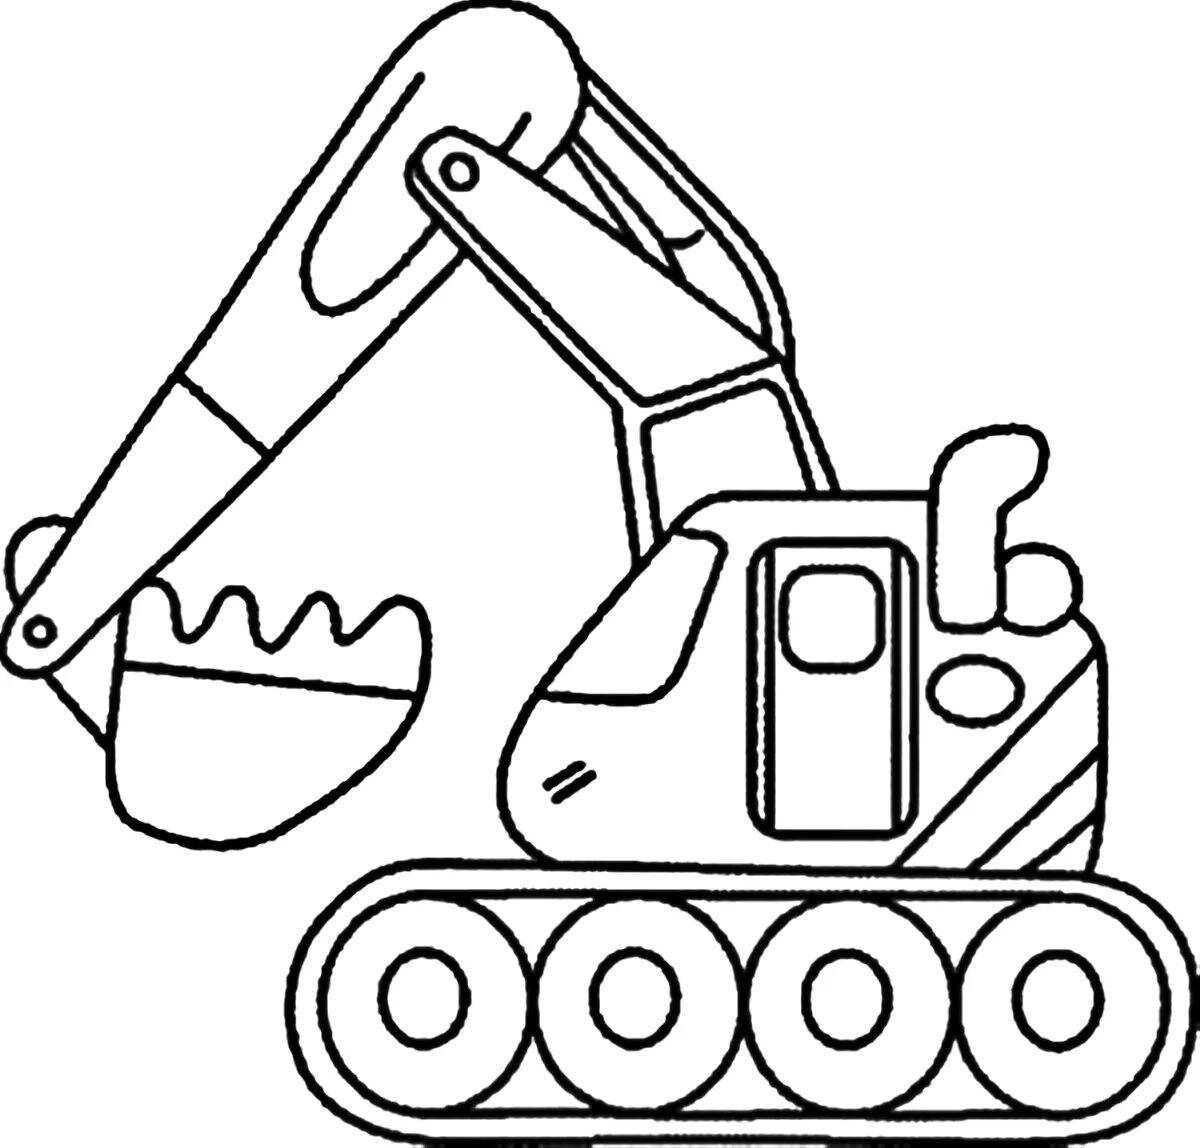 Coloring excavator for children 2-3 years old